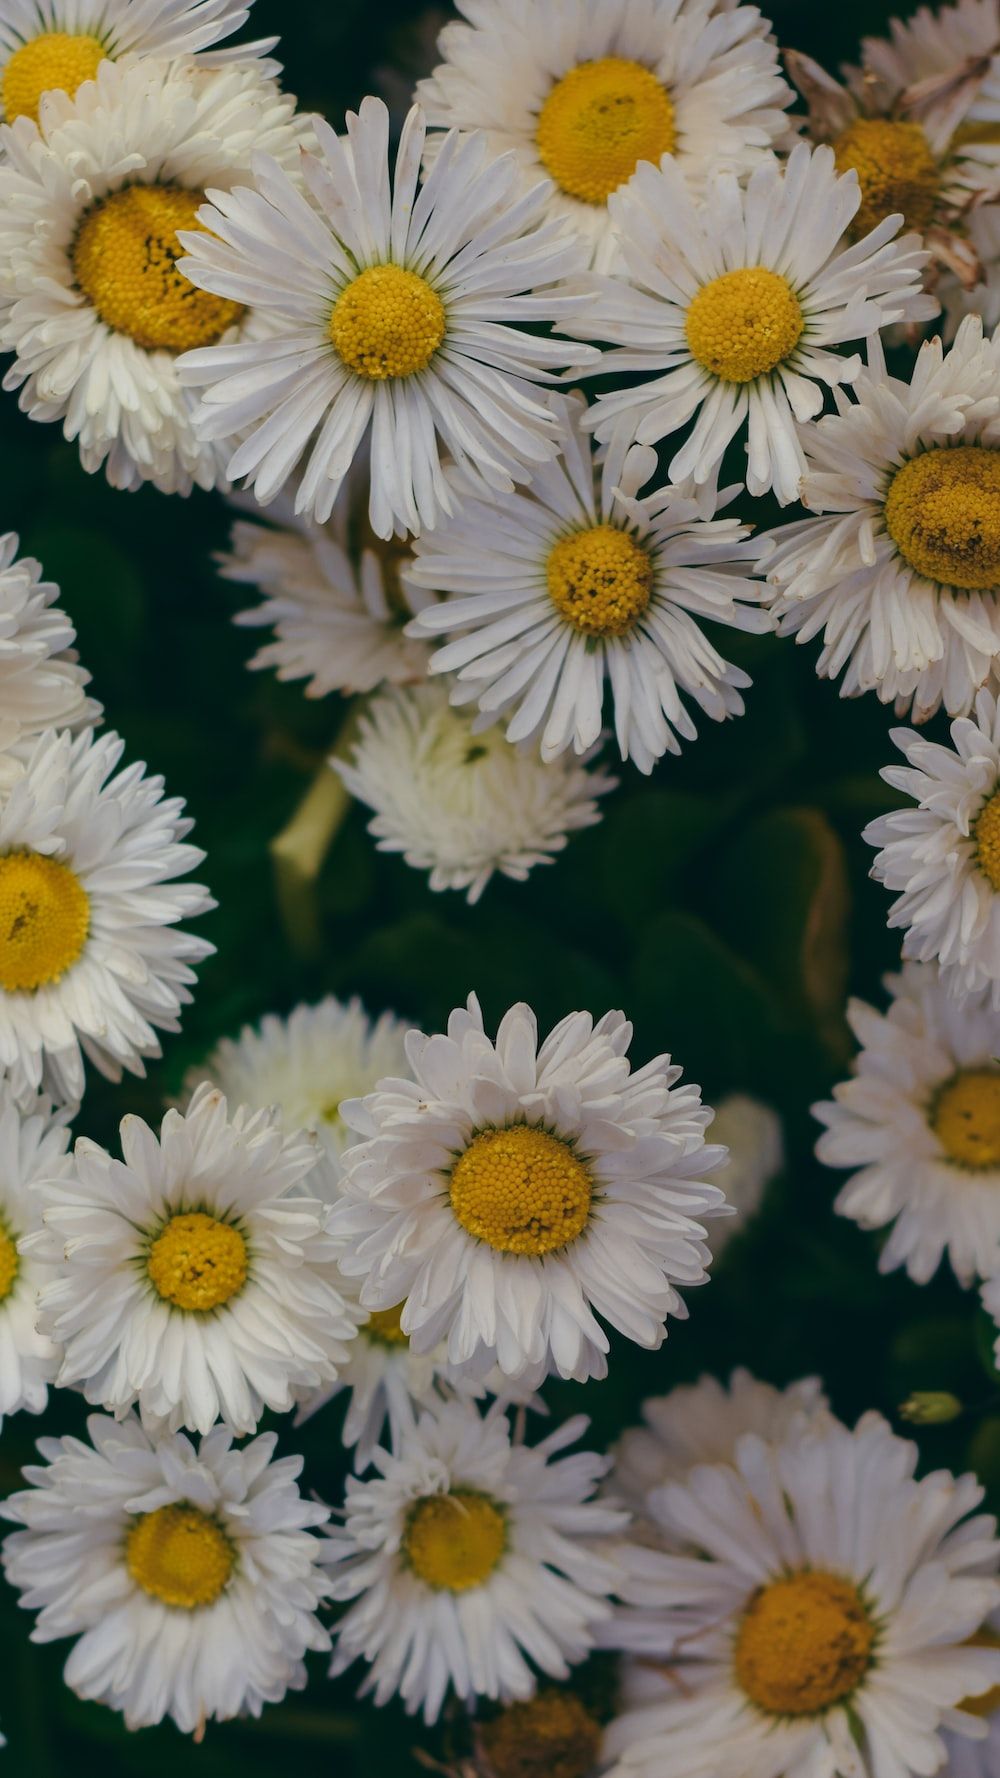 A bunch of white daisies with yellow centers - Daisy